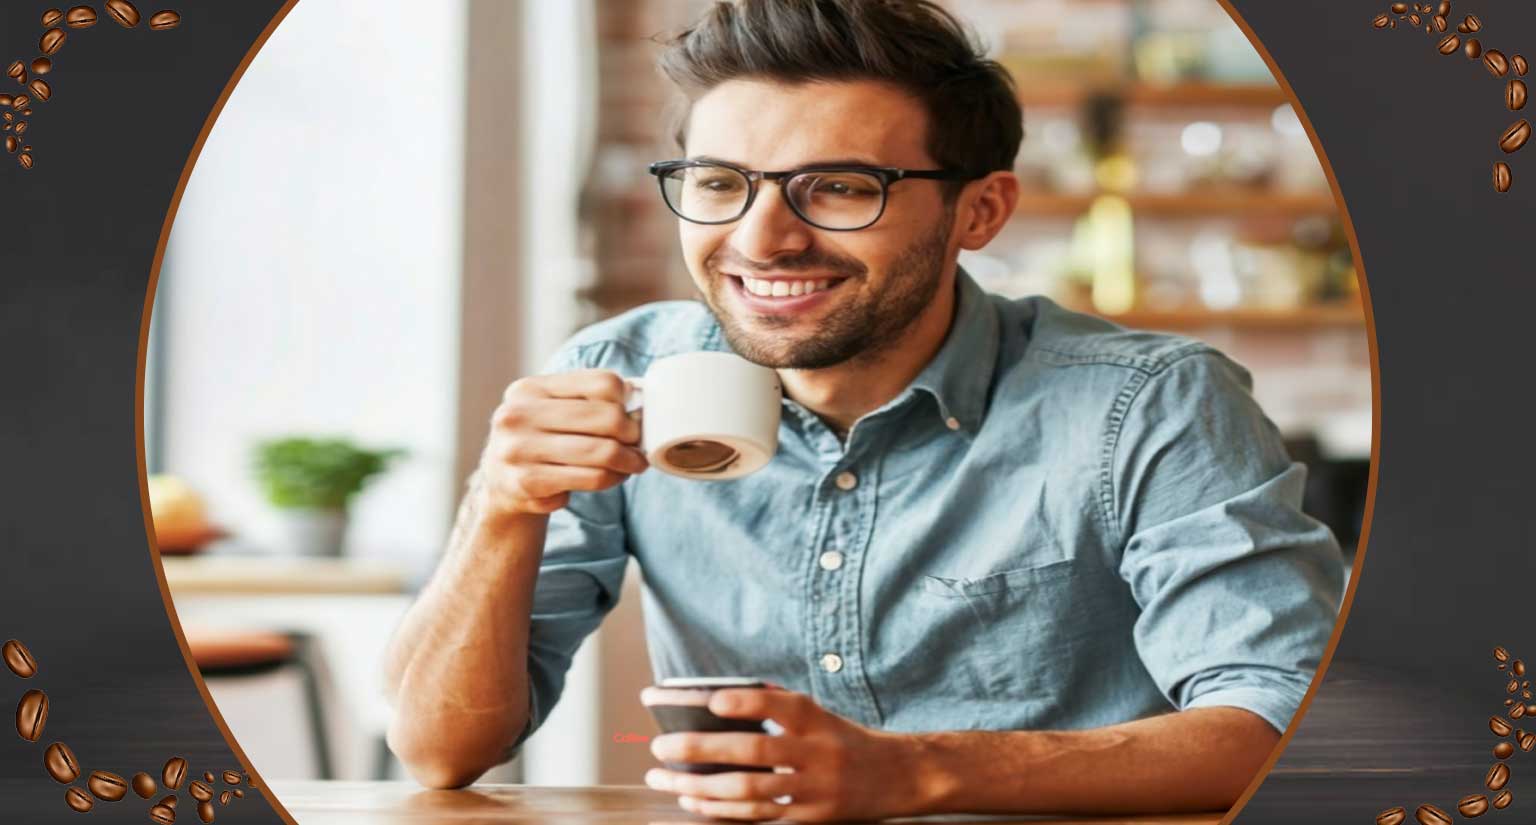 Can Coffee Make You Gain Weight?